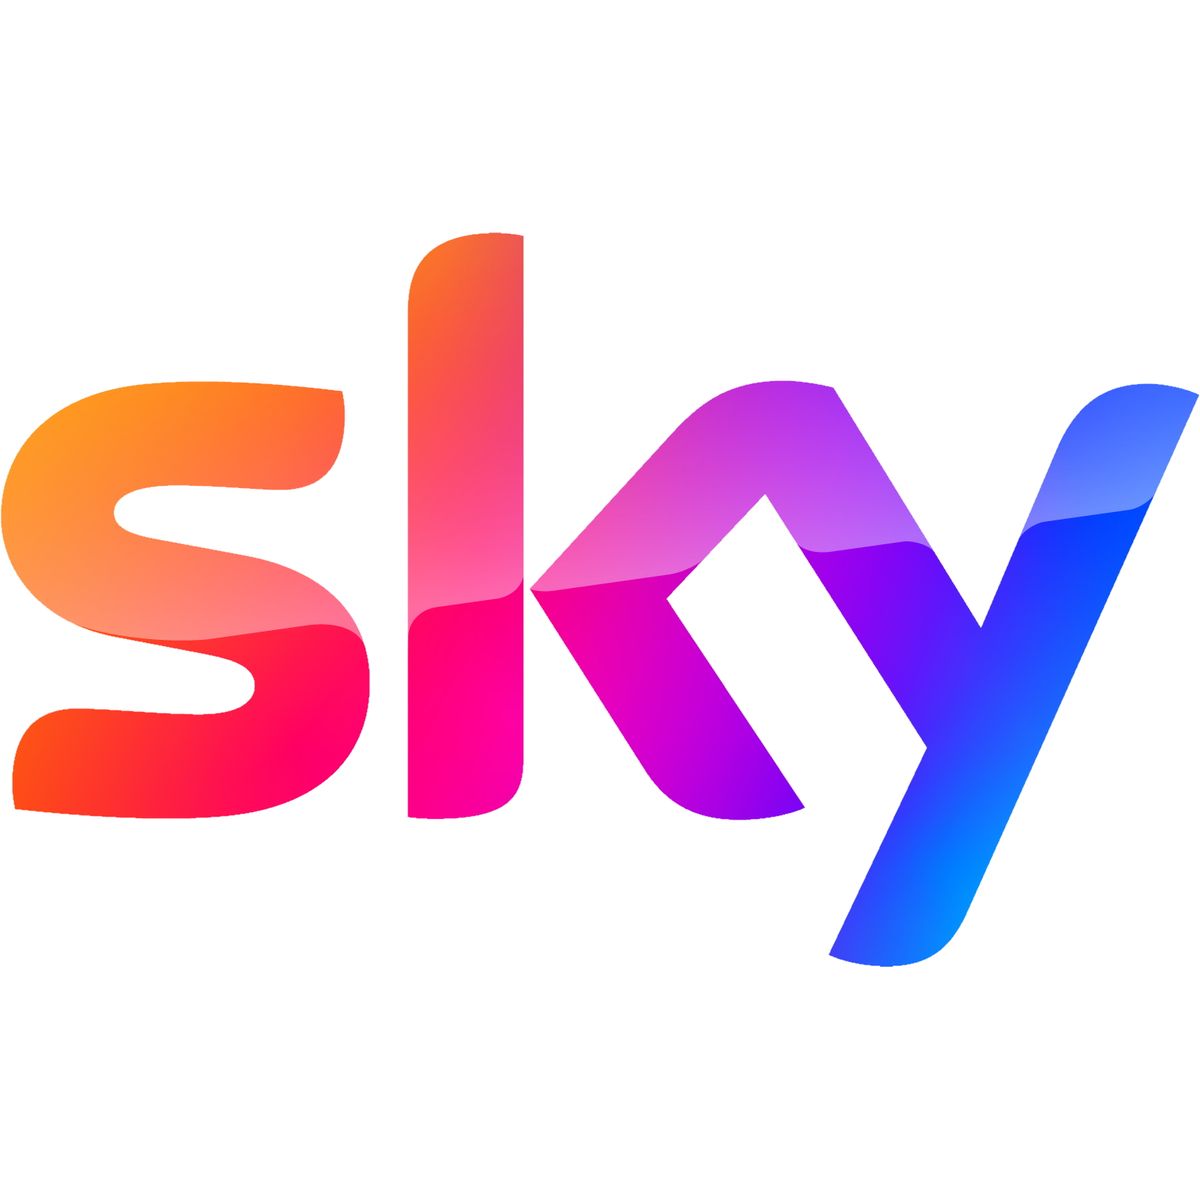 The Best Sky Tv Deals Packages And Sky Q Offers For Black Friday 2020 Techradar